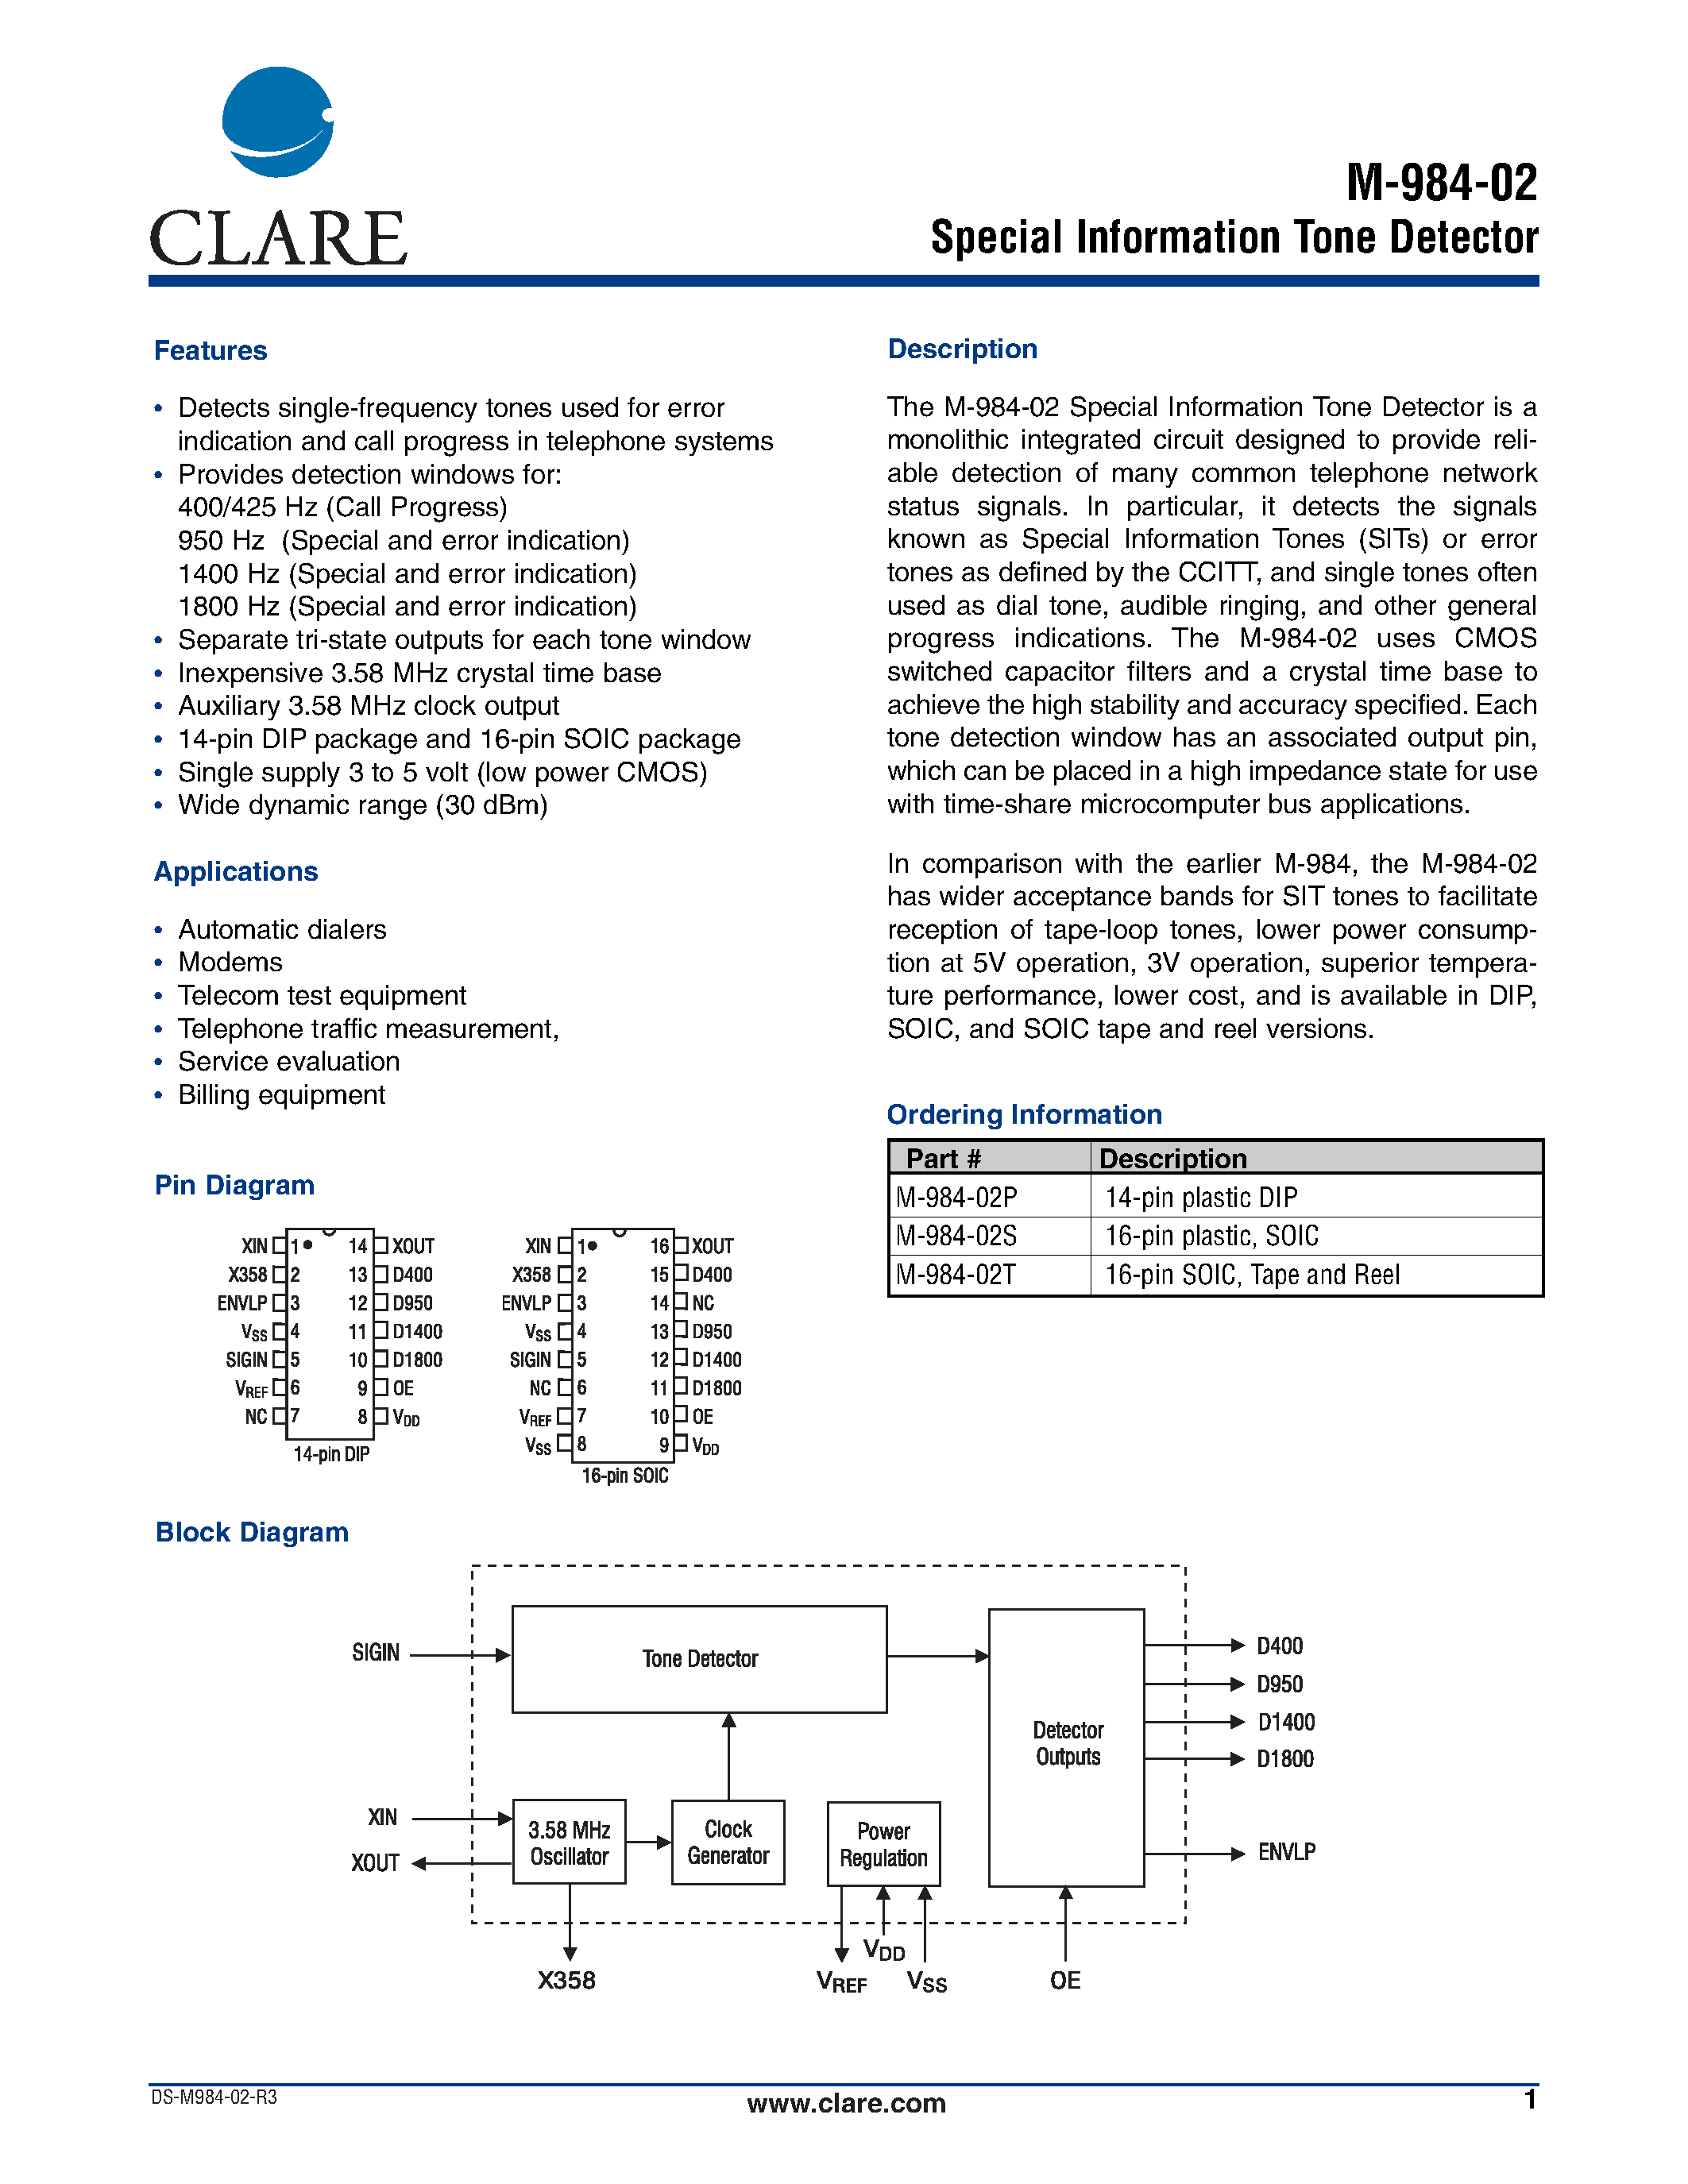 Datasheet M-984-02 - Special Information Tone Detector page 1